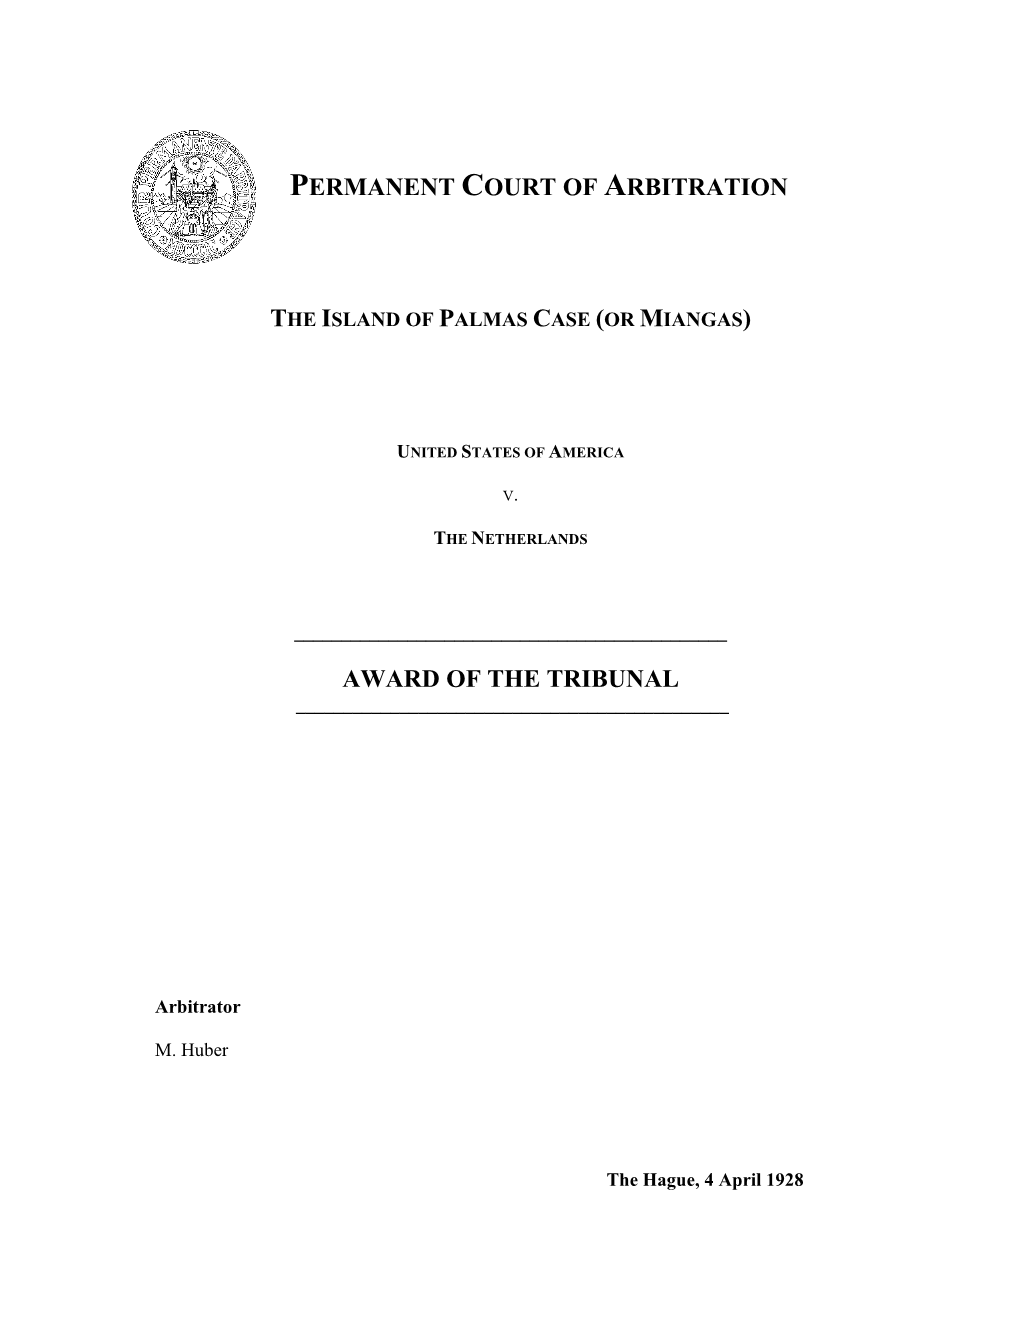 Permanent Court of Arbitration Award of The